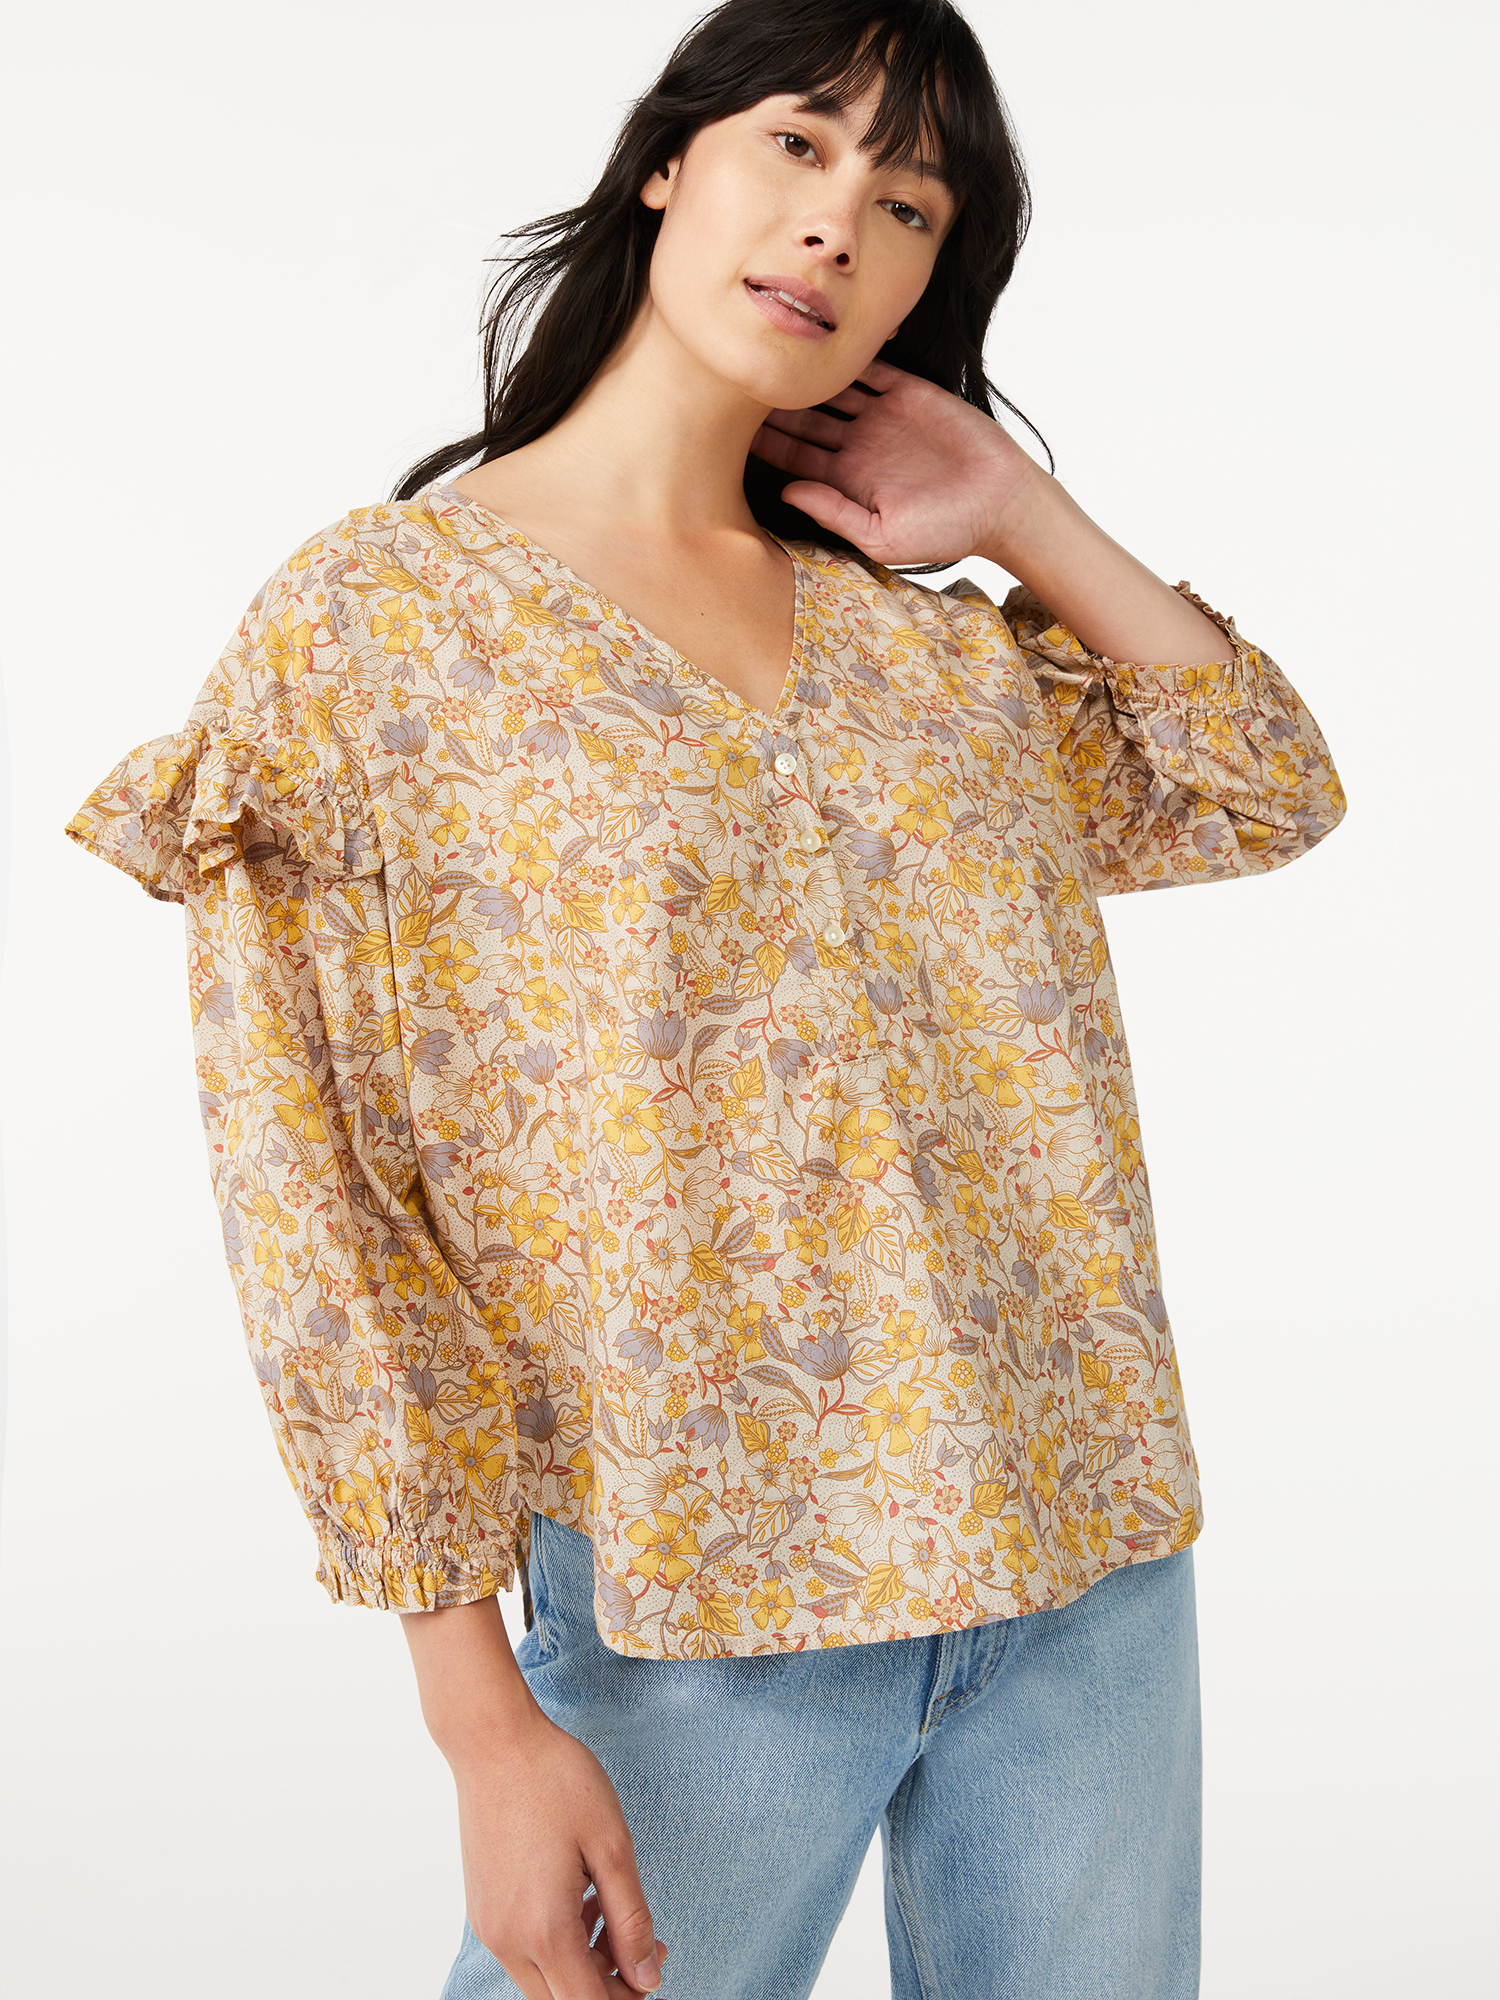 Free Assembly Women's Ruffle Sleeve Top - image 1 of 7